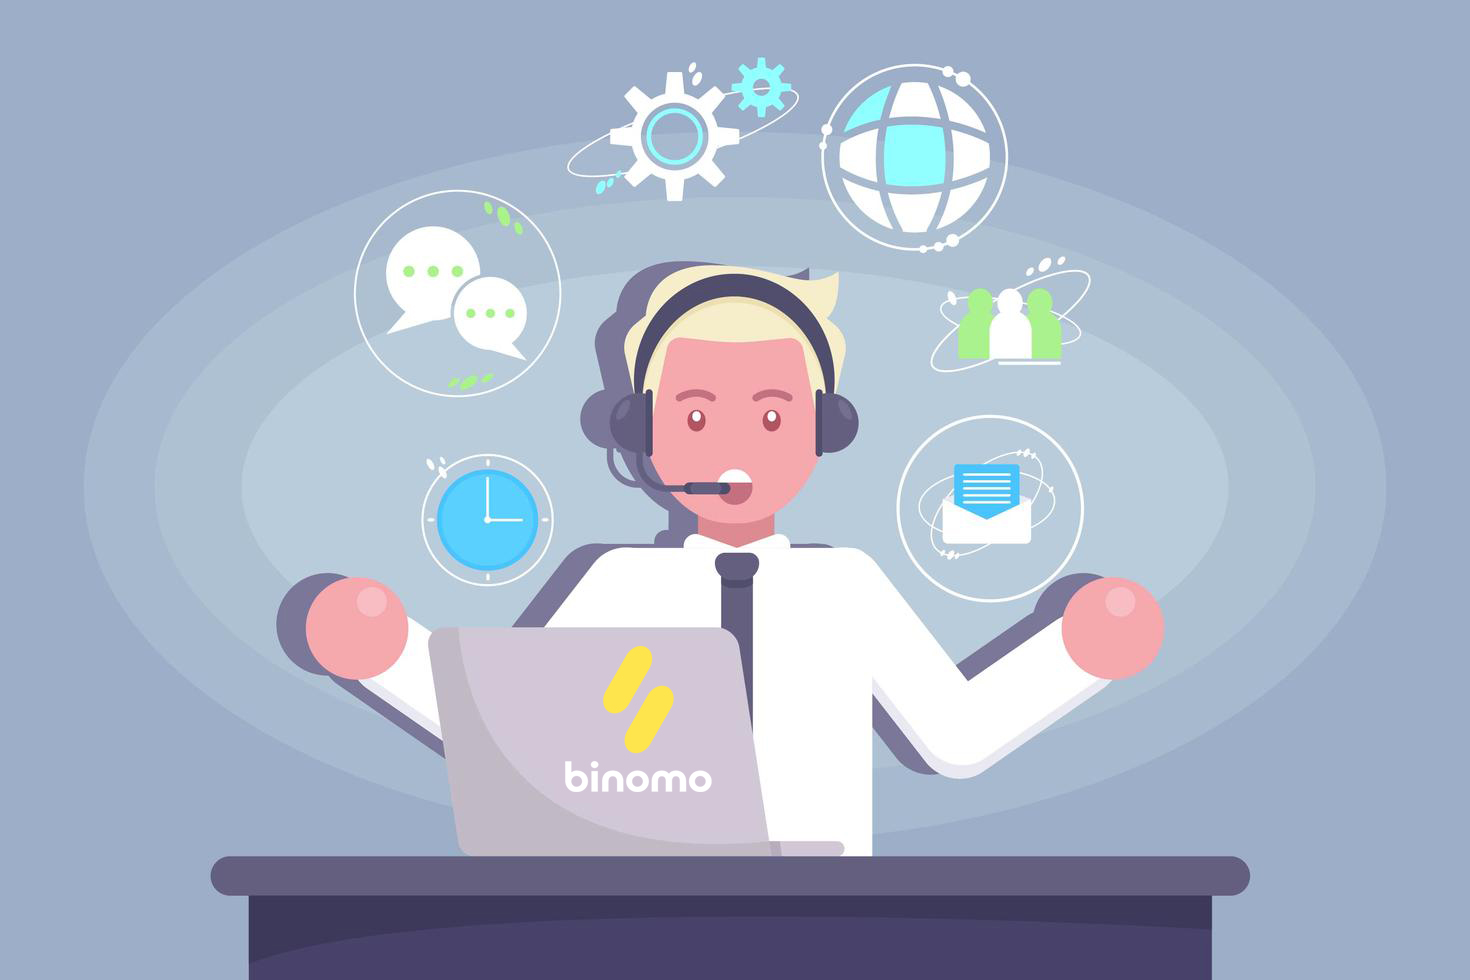 How to Contact Binomo Support